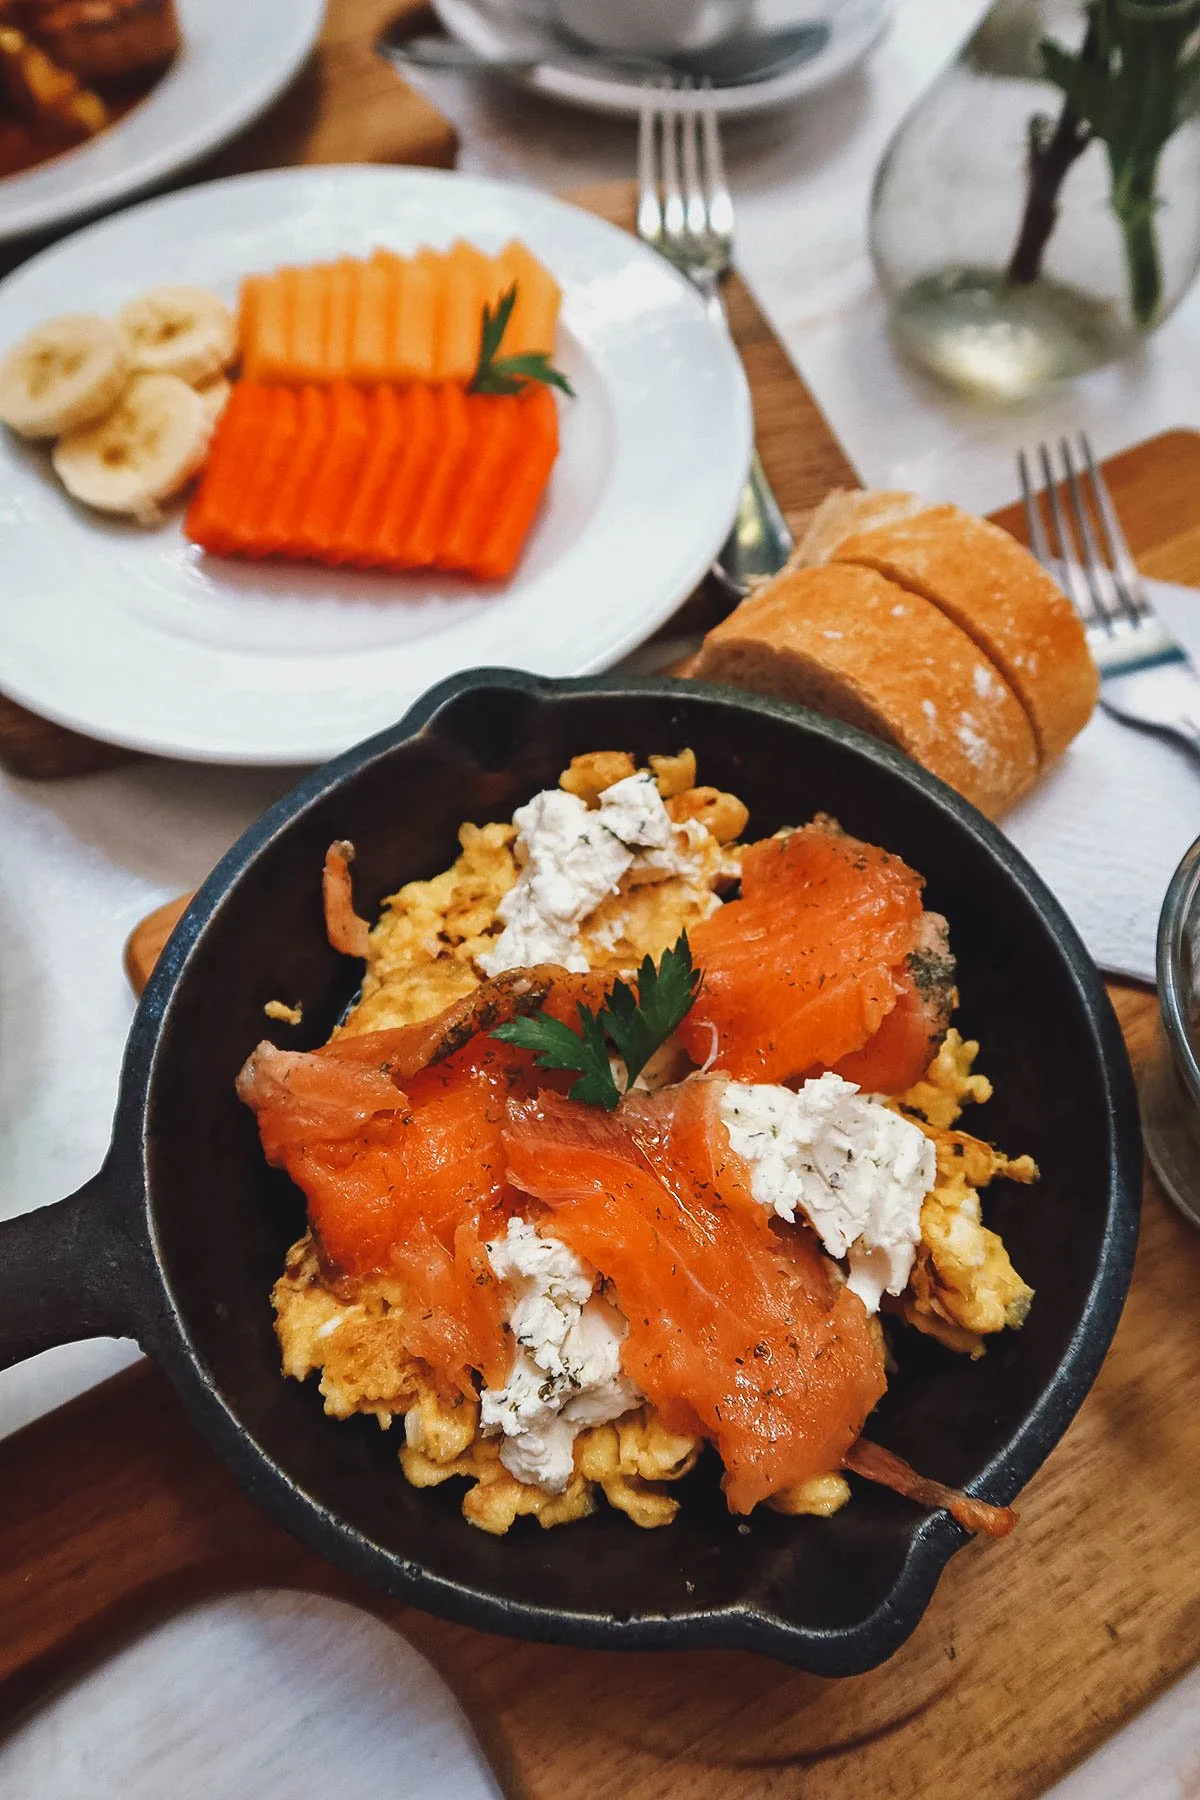 Smoked salmon with scrambled eggs, goat cheese, and onions